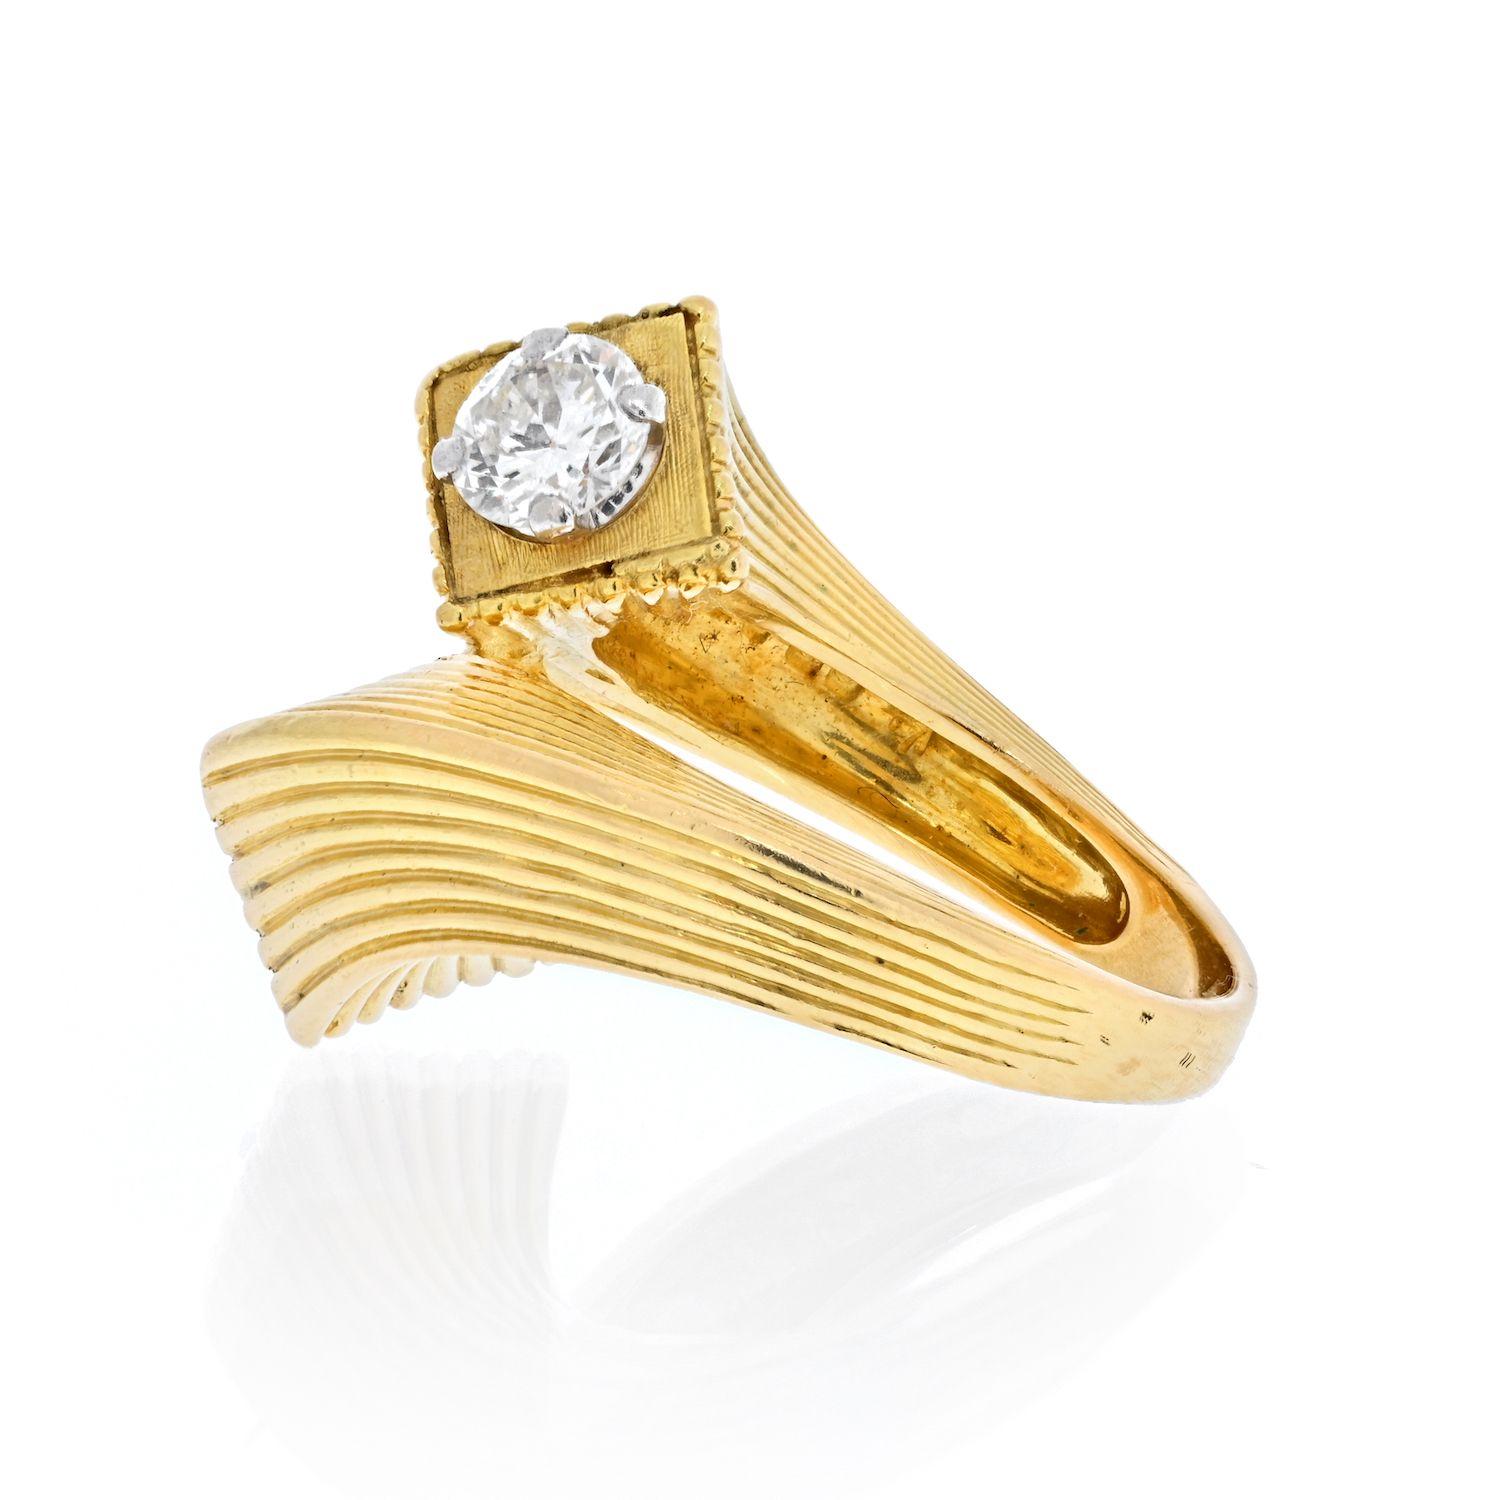 Kutchinsky Gold and Diamond Bypass Ring, 18 kt., the rigid mount centering 2 round diamonds ap. 1.60ct., signed Kutchinsky, with English hallmarks. Ring can be sized. 
Finger size 6.5